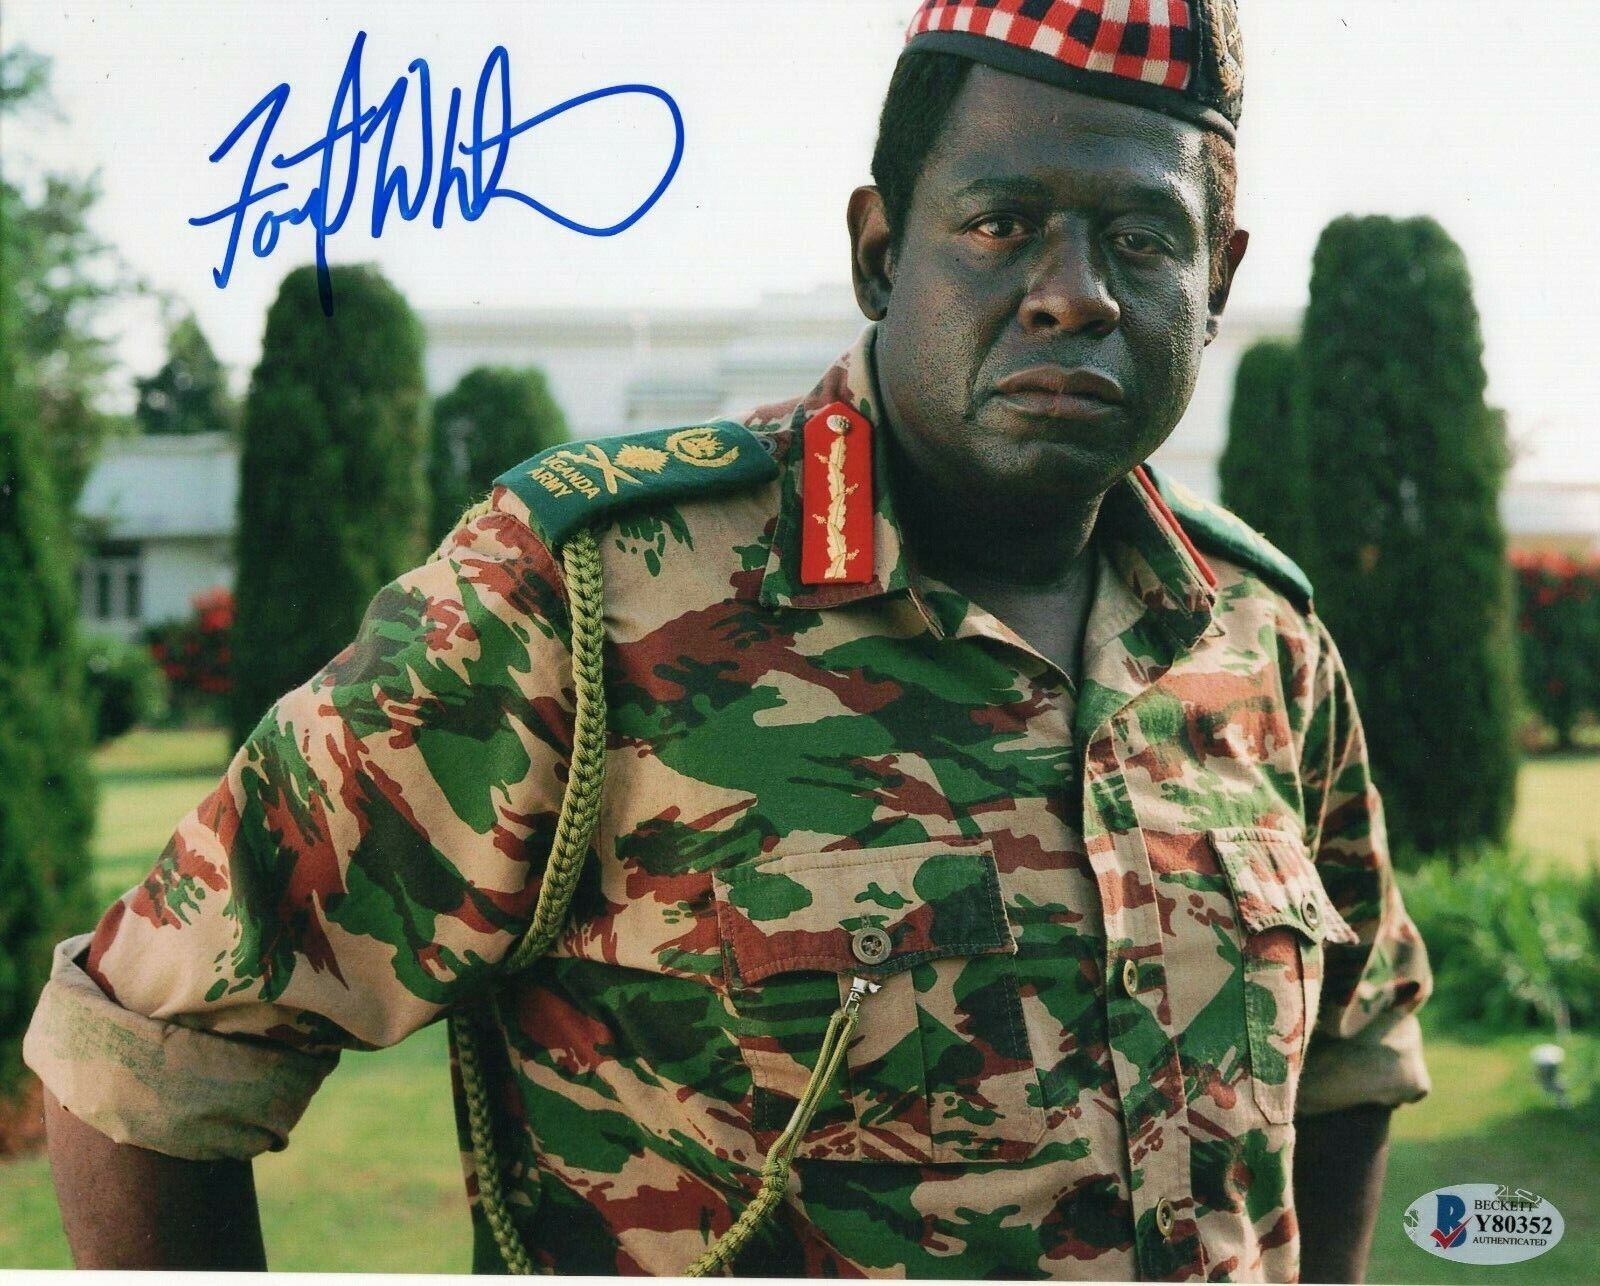 Forest Whitaker Signed 8x10 Photo Poster painting Last King of Scotland w/Beckett COA Y80352